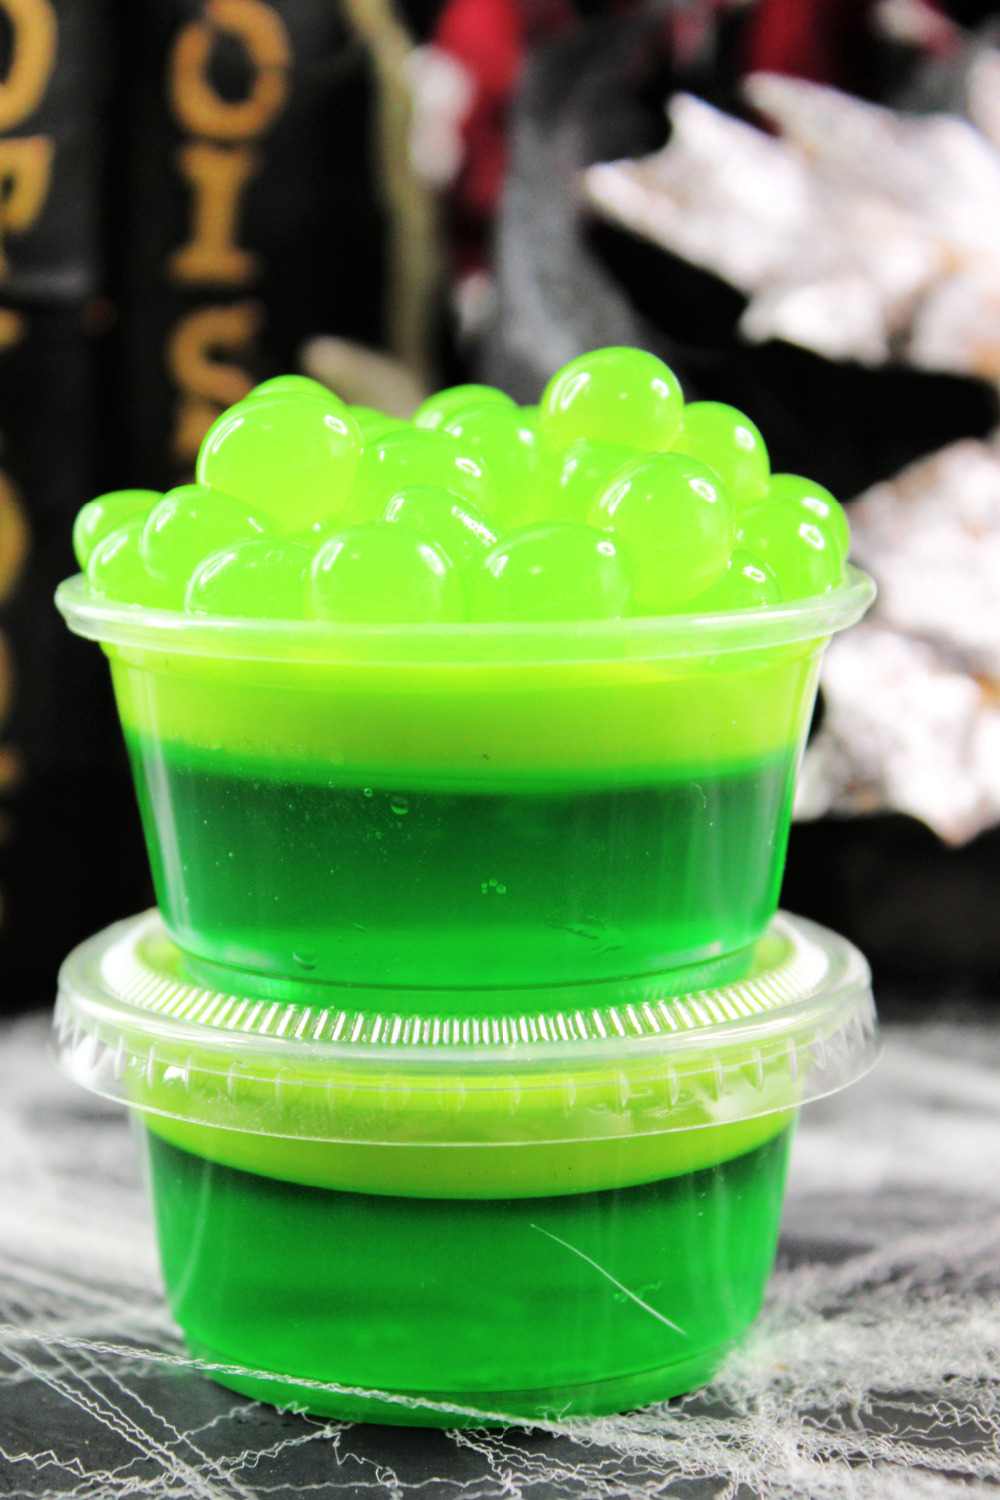 Bubbly Witches Brew Jello Shots for Halloween Parties. These green jello shots are sitting on a spiderweb background. The tops of the jello shots are topped with green apple popping bobas.